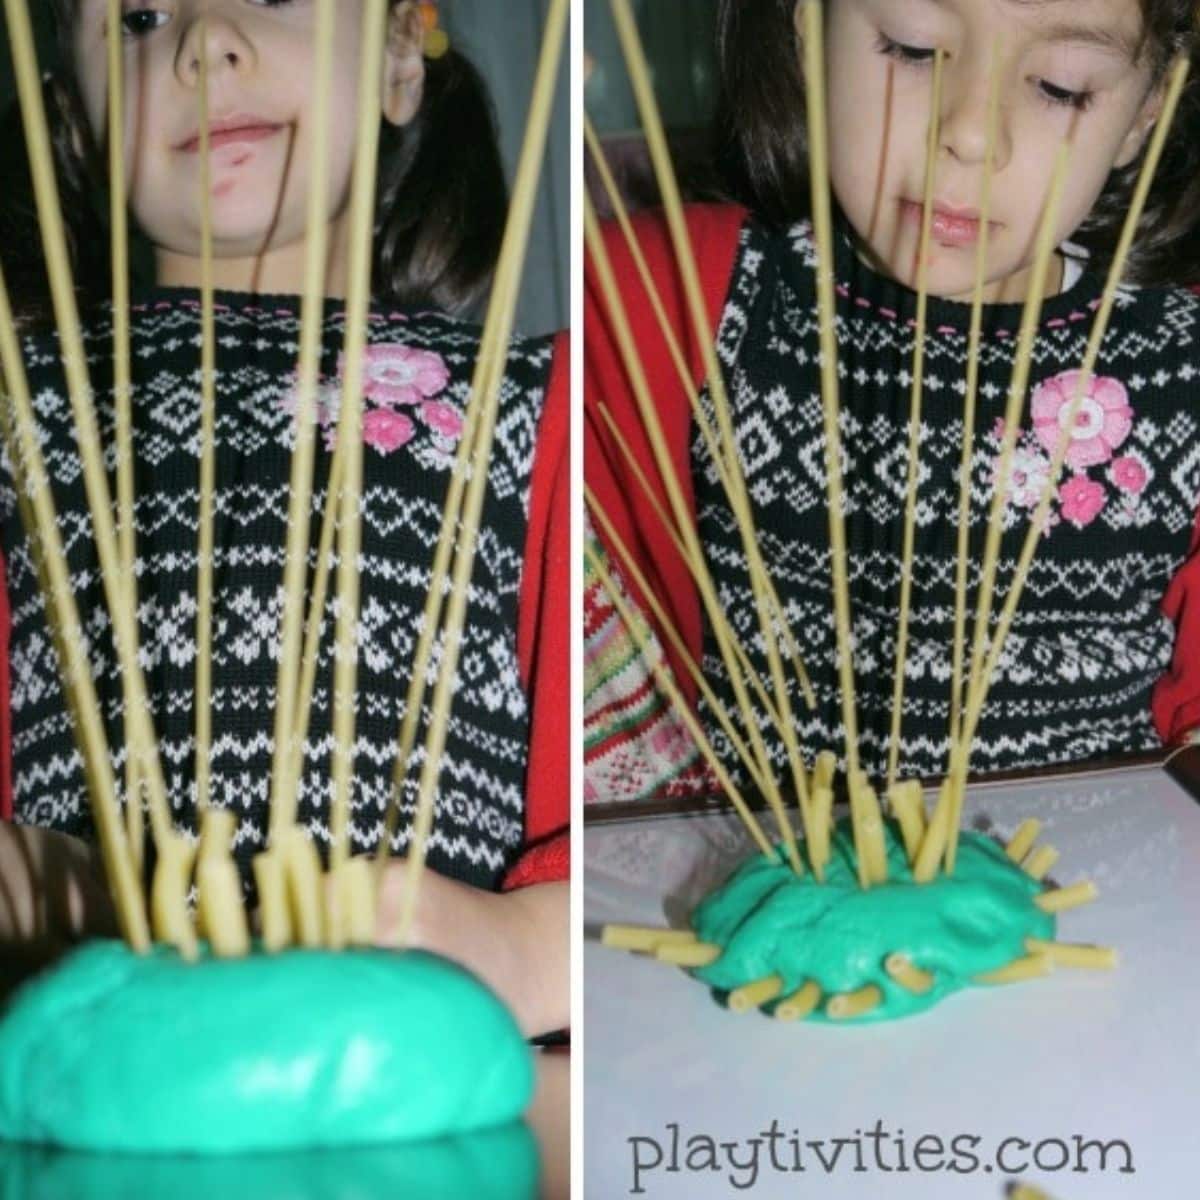 2 images of girl making paydough pasta creations.